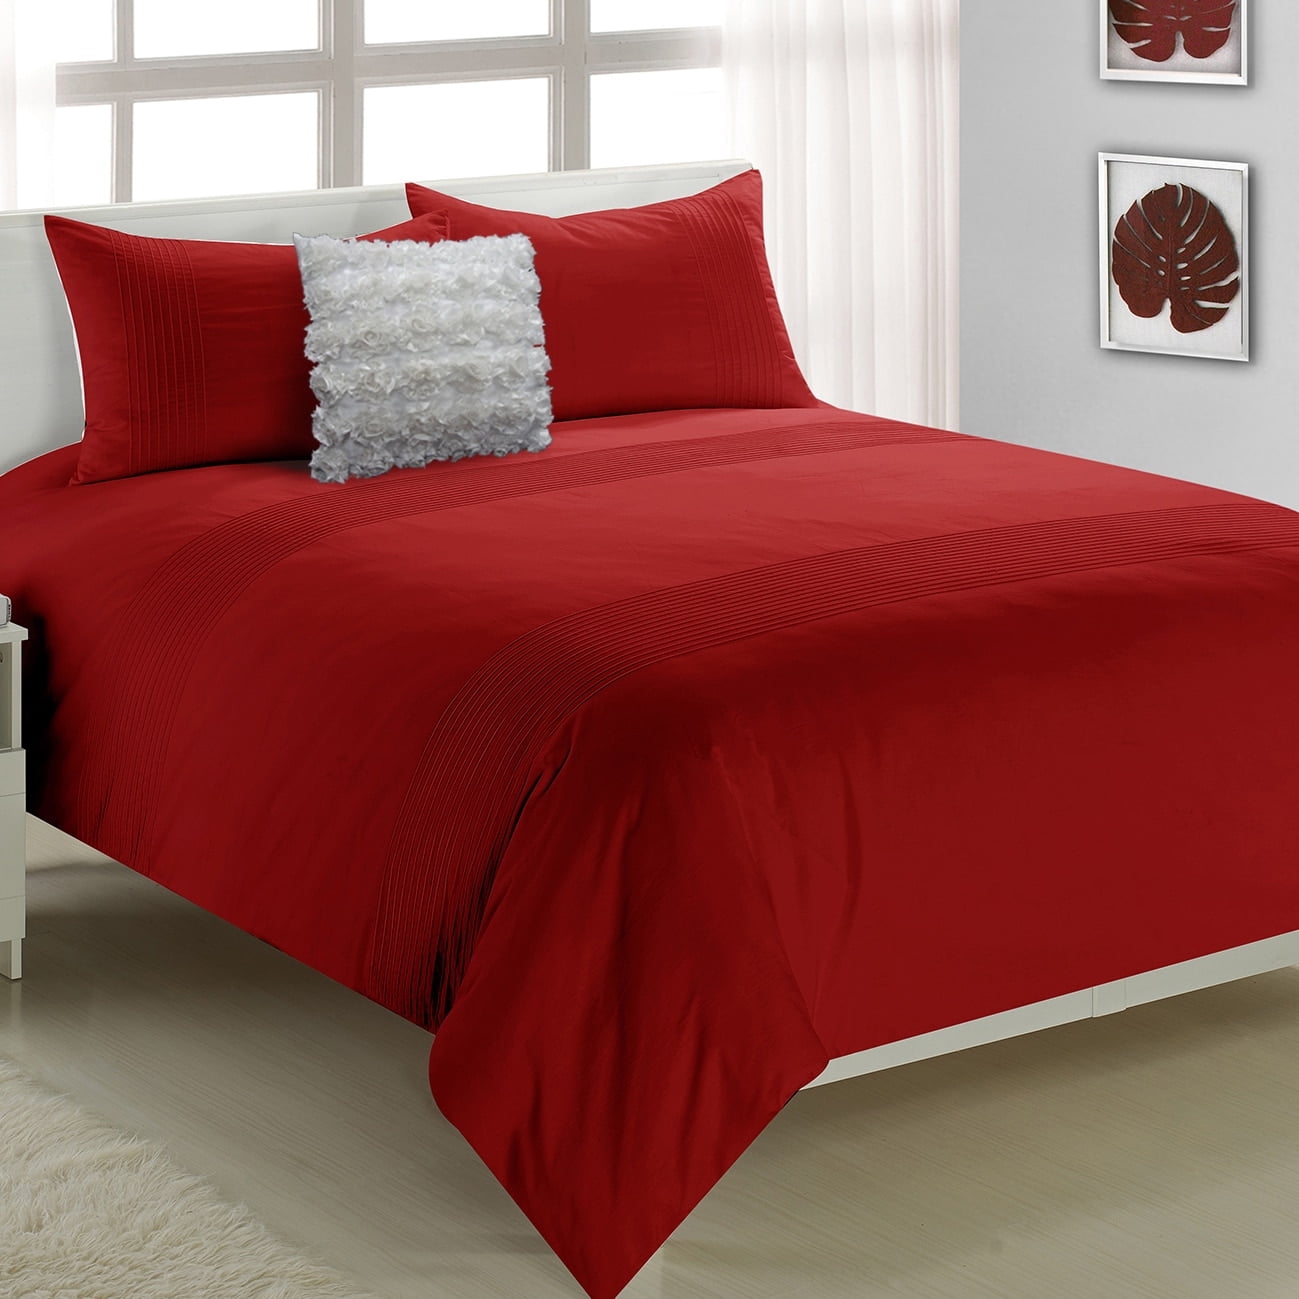 Anthony Duvet Cover Set Polycotton Red Walmart Canada